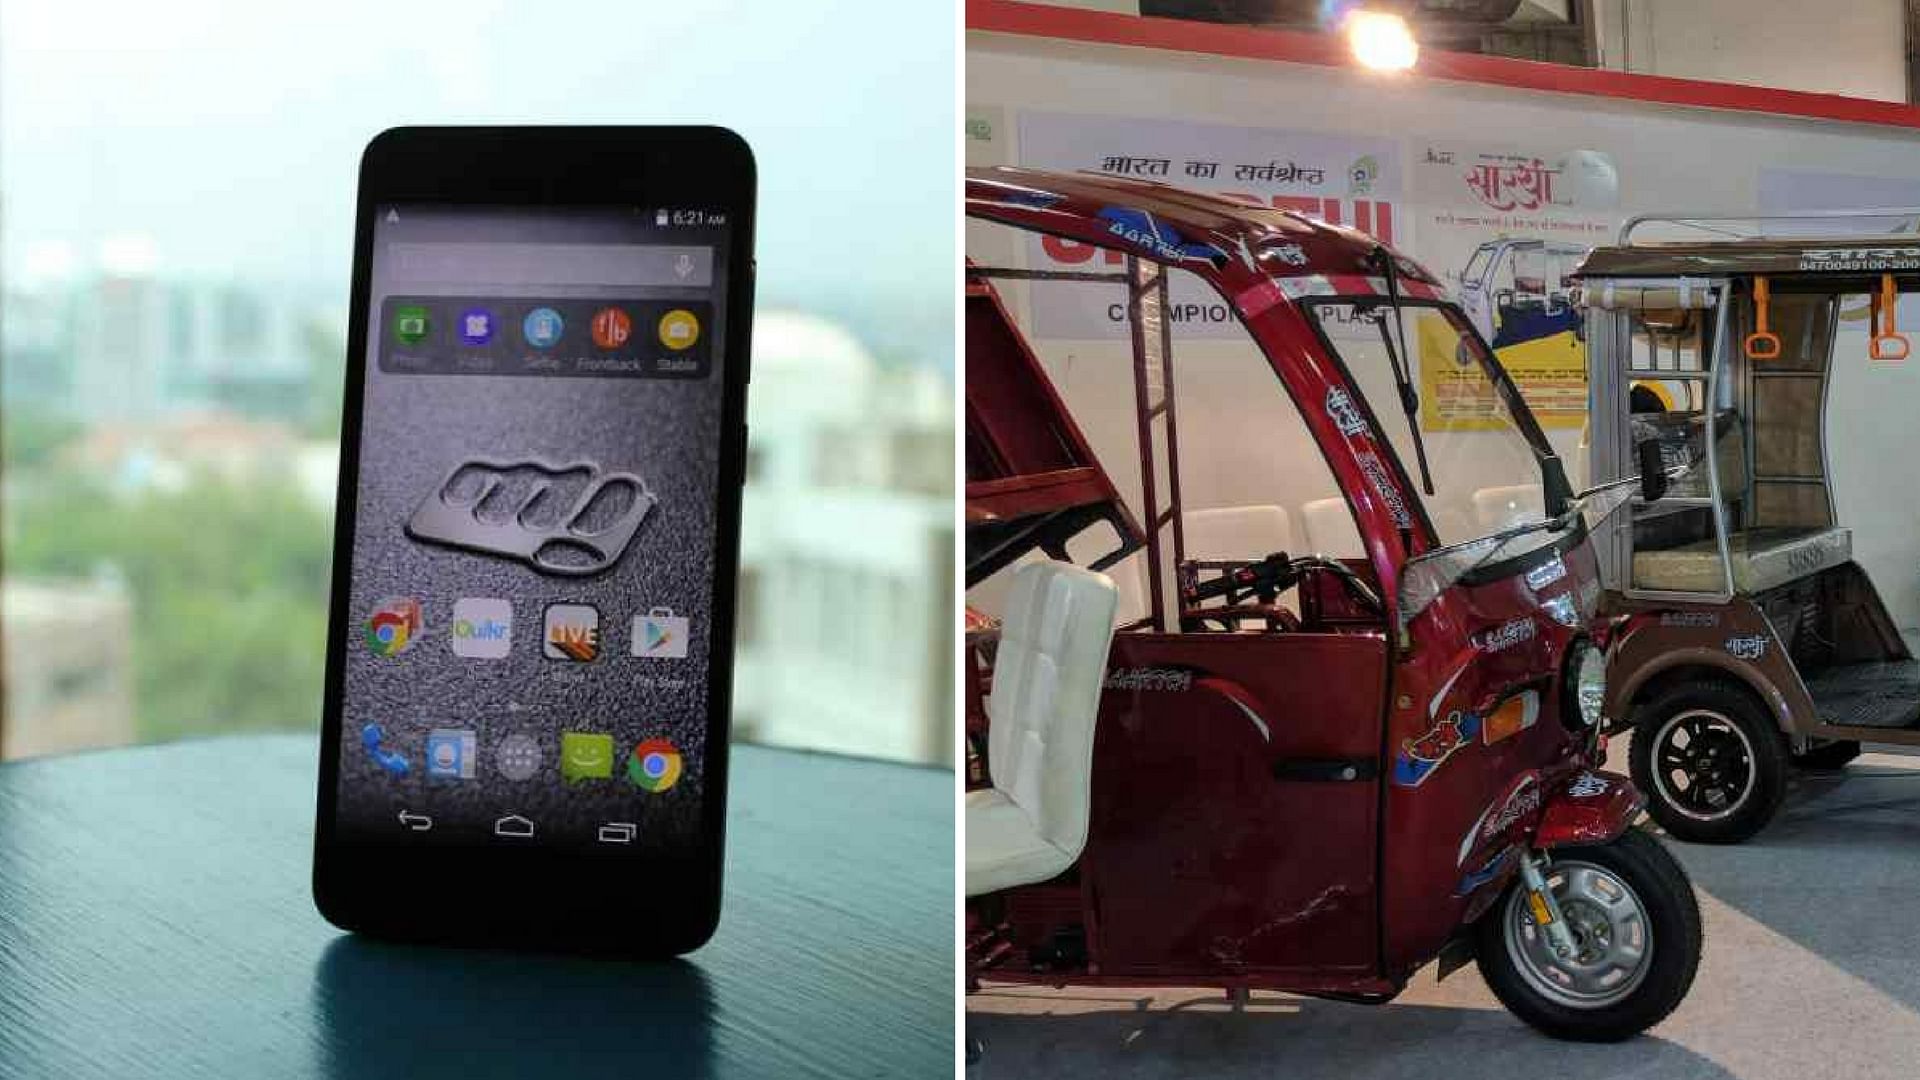 Micromax electric autos in India? It could happen soon.&nbsp;